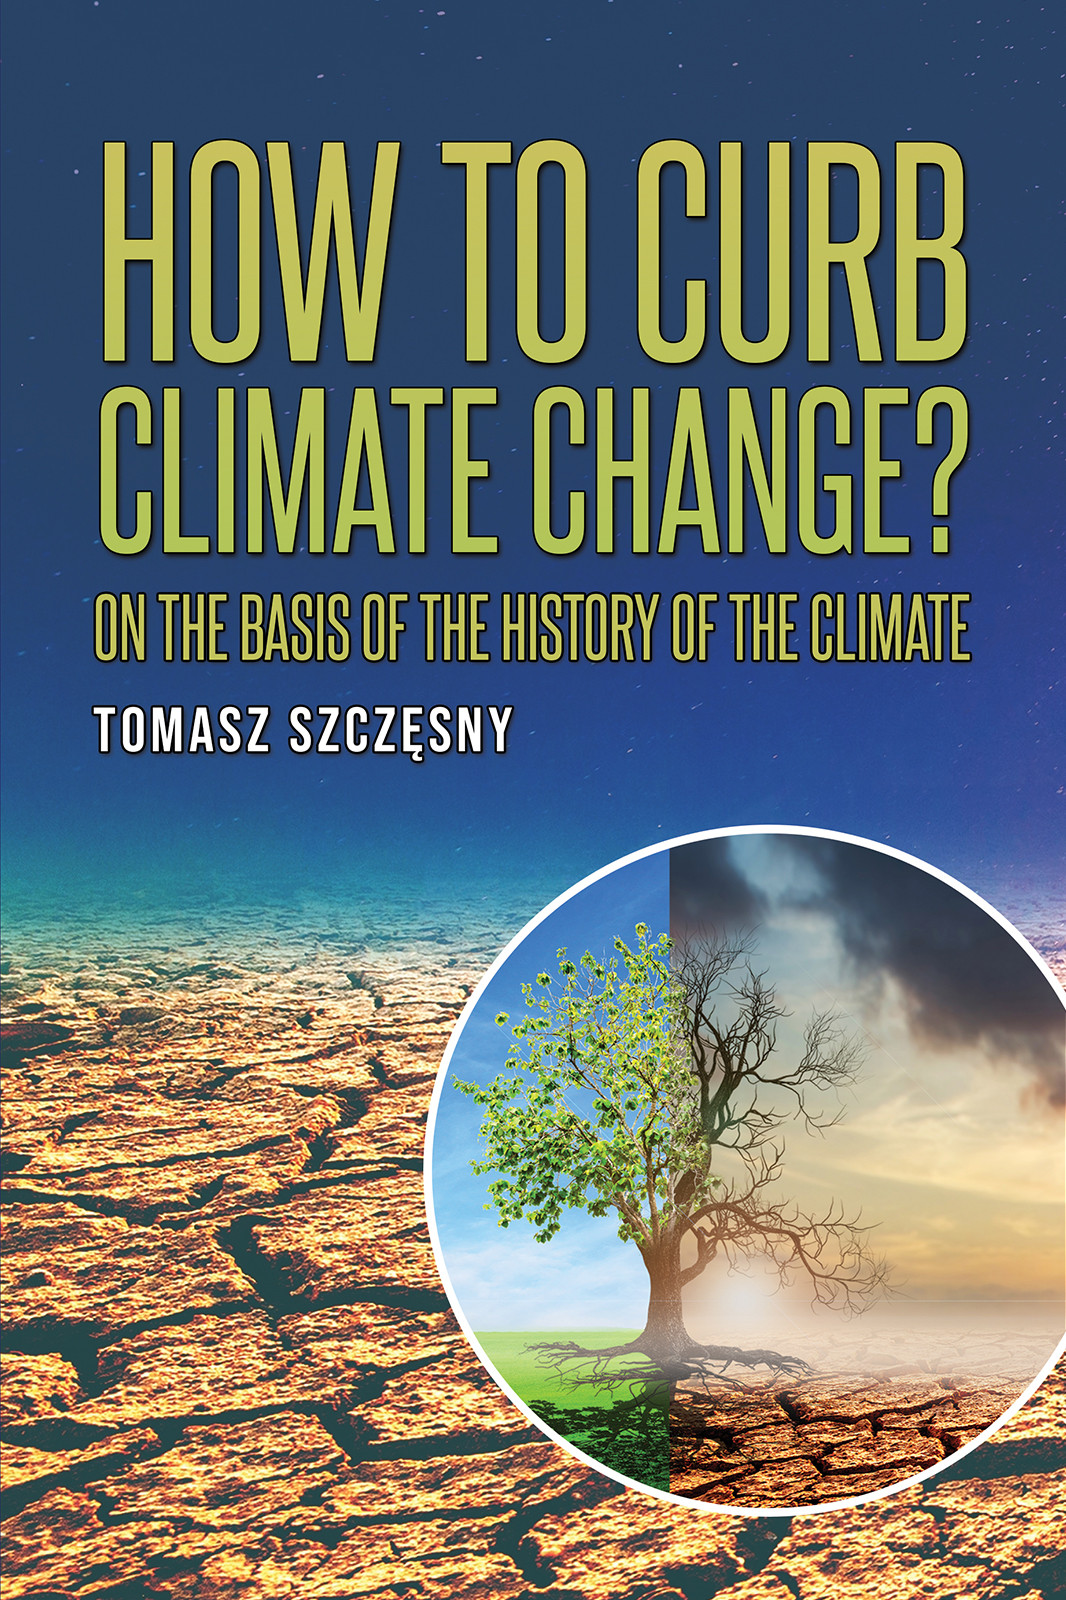 How to Curb Climate Change?